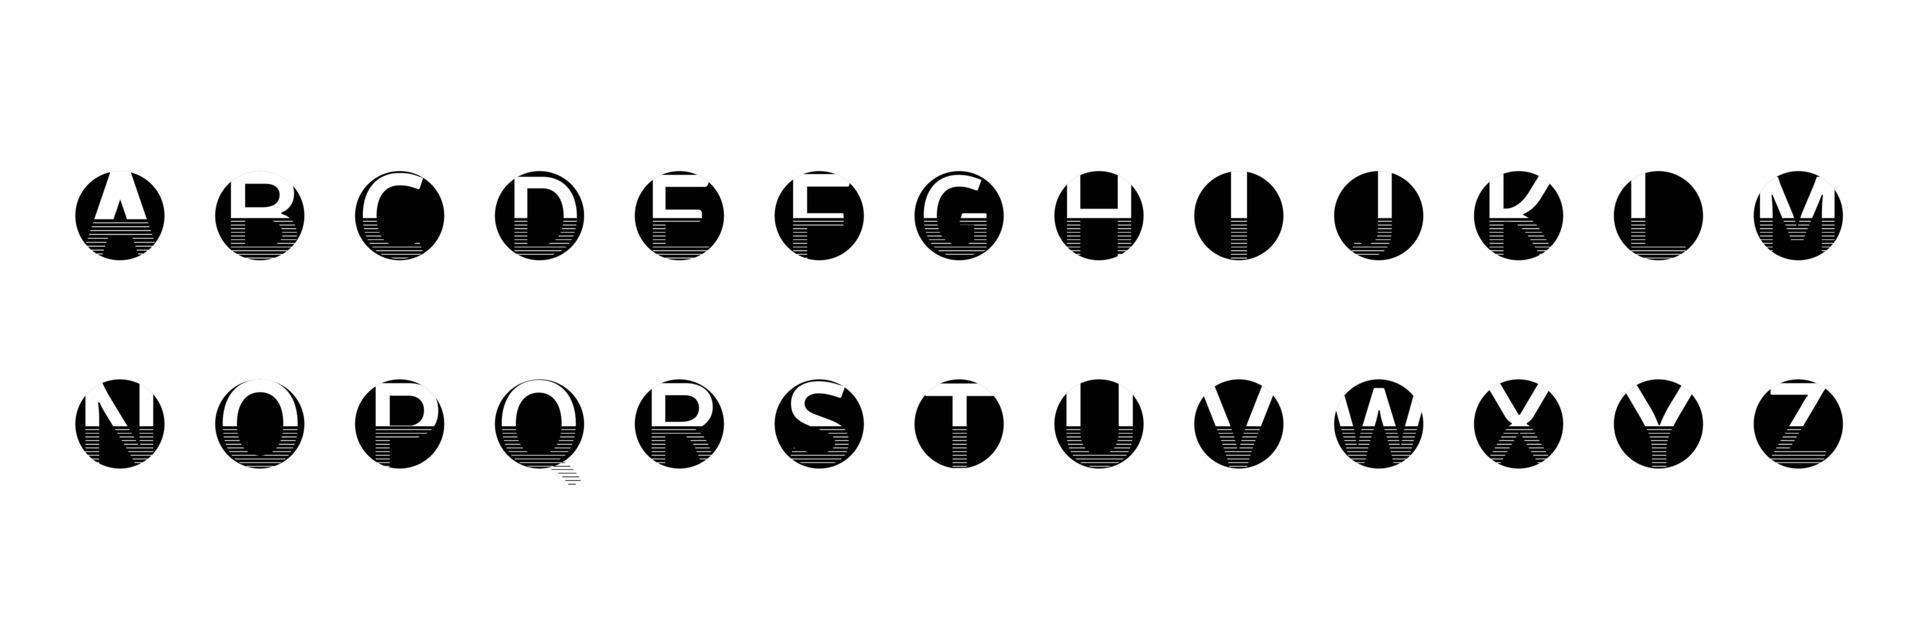 English alphabet black circles with line on a white background vector